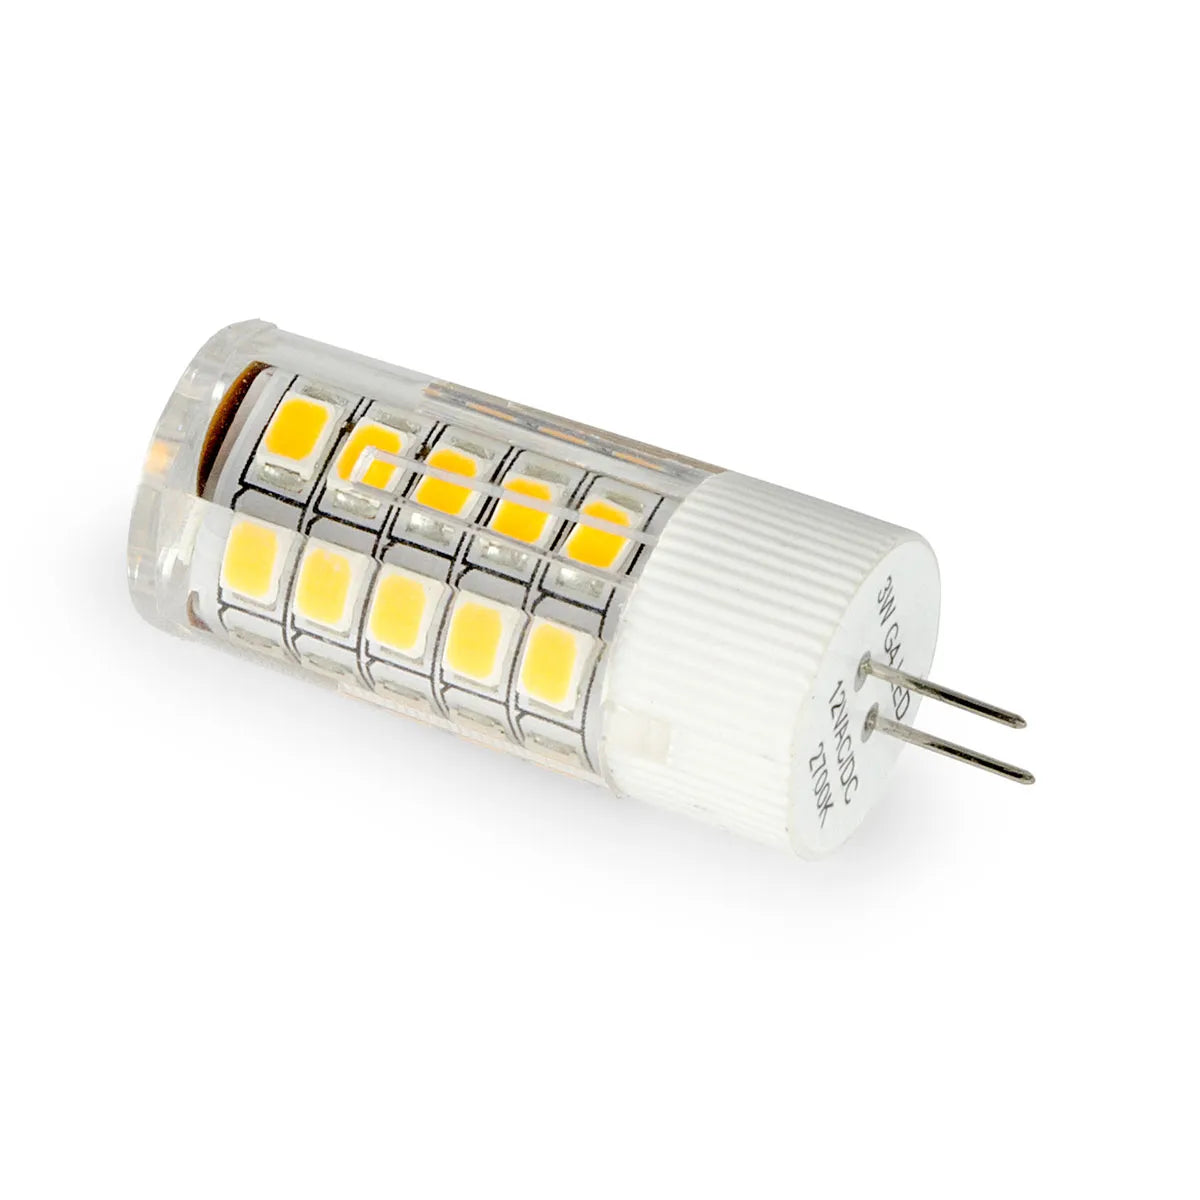 Photo of Aquascape Path and Area 3 Watt LED Replacement Bulb - Marquis Gardens